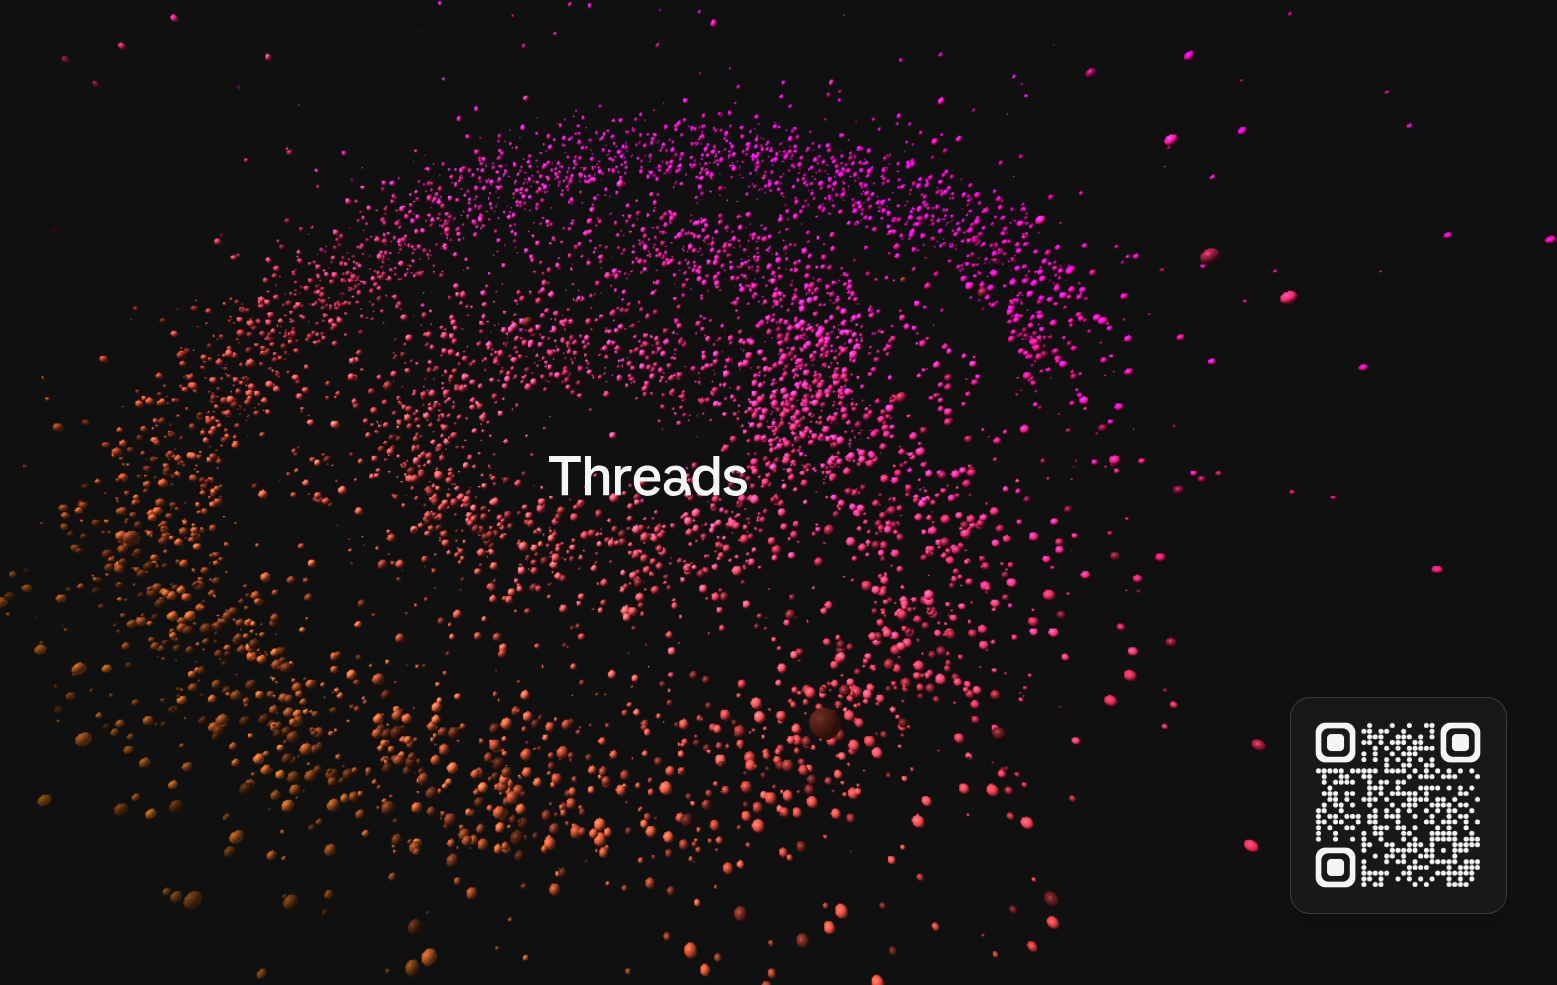 Threads is here! Now what?